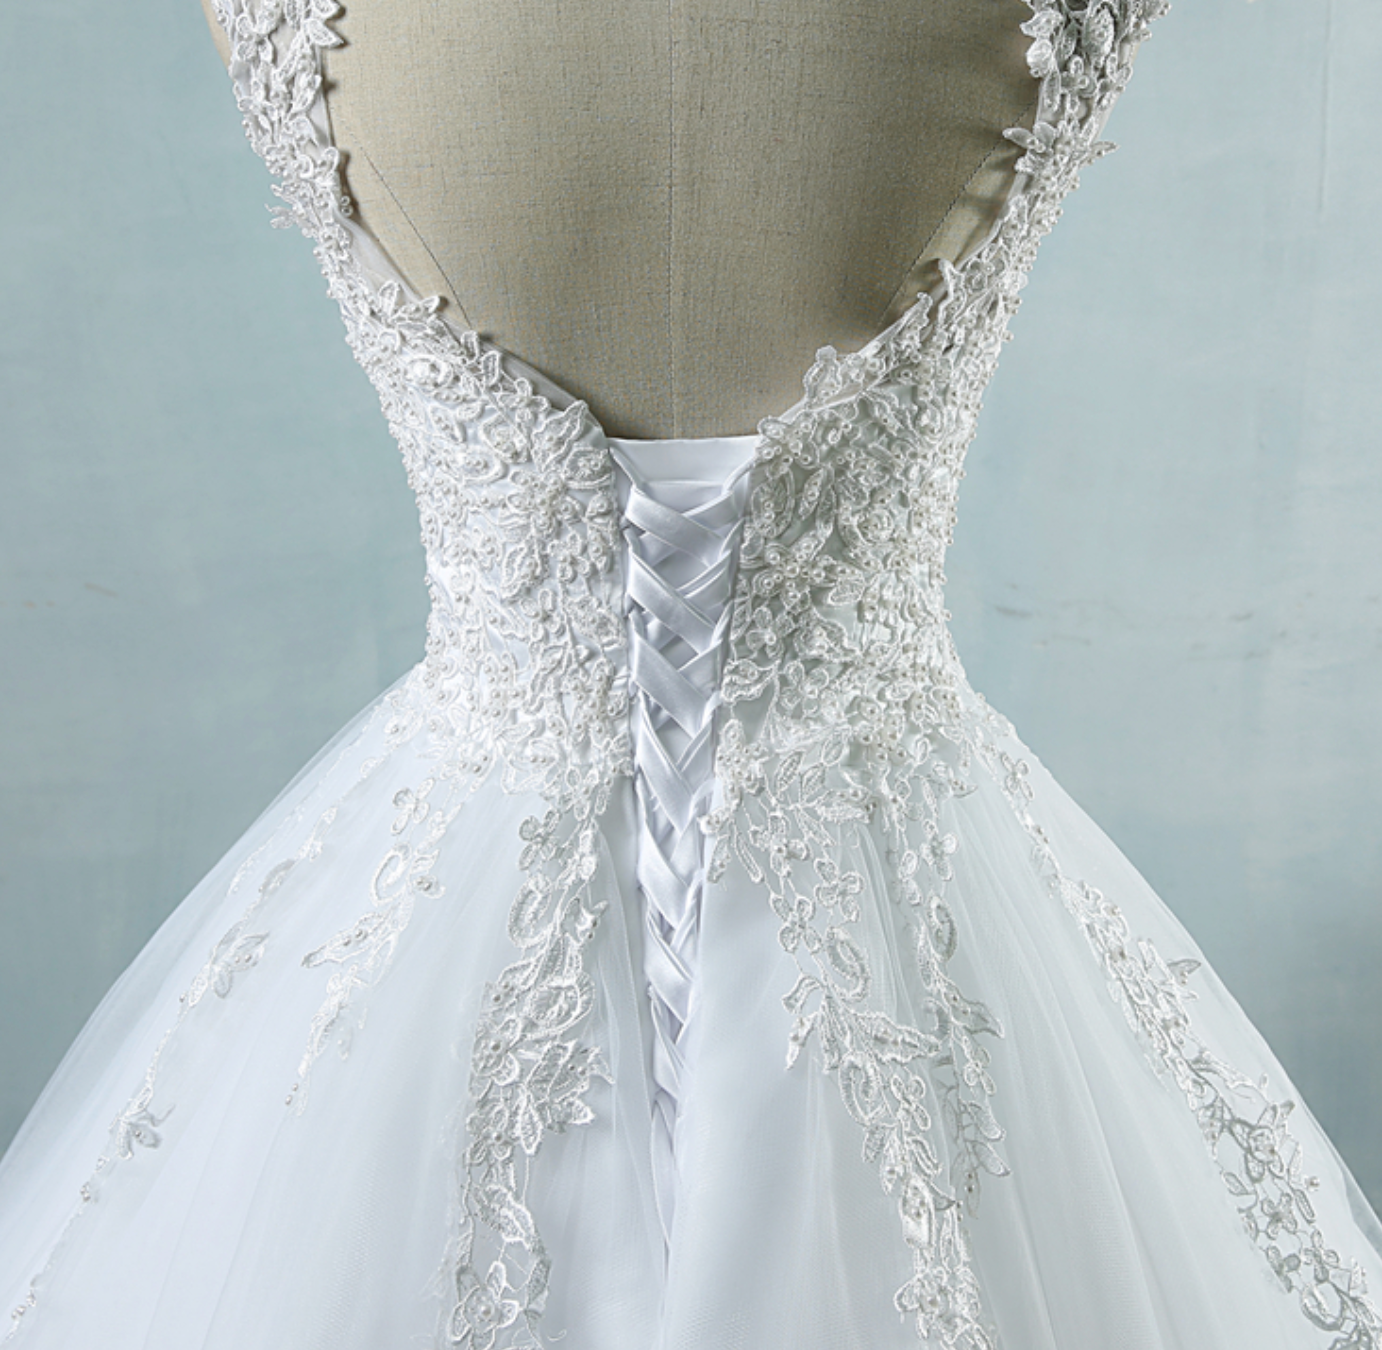 Tulle Wedding Dress with Pearls and Lace Appliques - TulleLux Bridal Crowns &  Accessories 